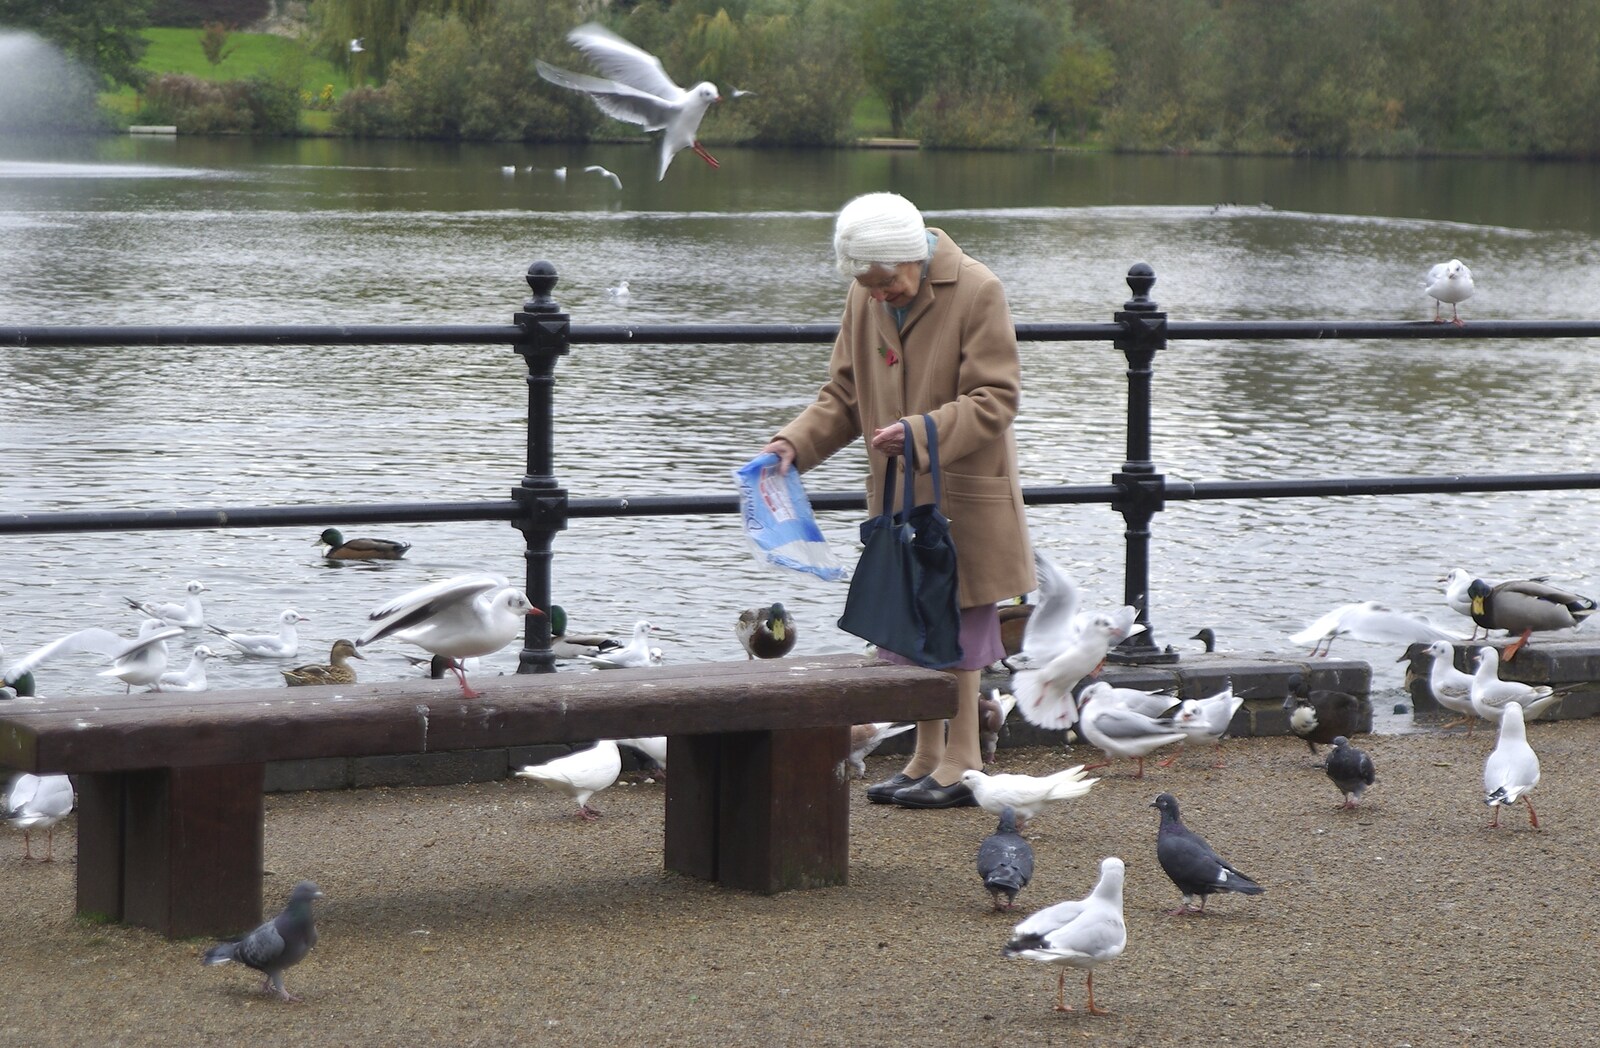 Isobel's Birthday and a Café Miscellany, Cambridge and Suffolk - 2nd November 2008: An old woman is mobbed by seagulls as she tries to feed the ducks